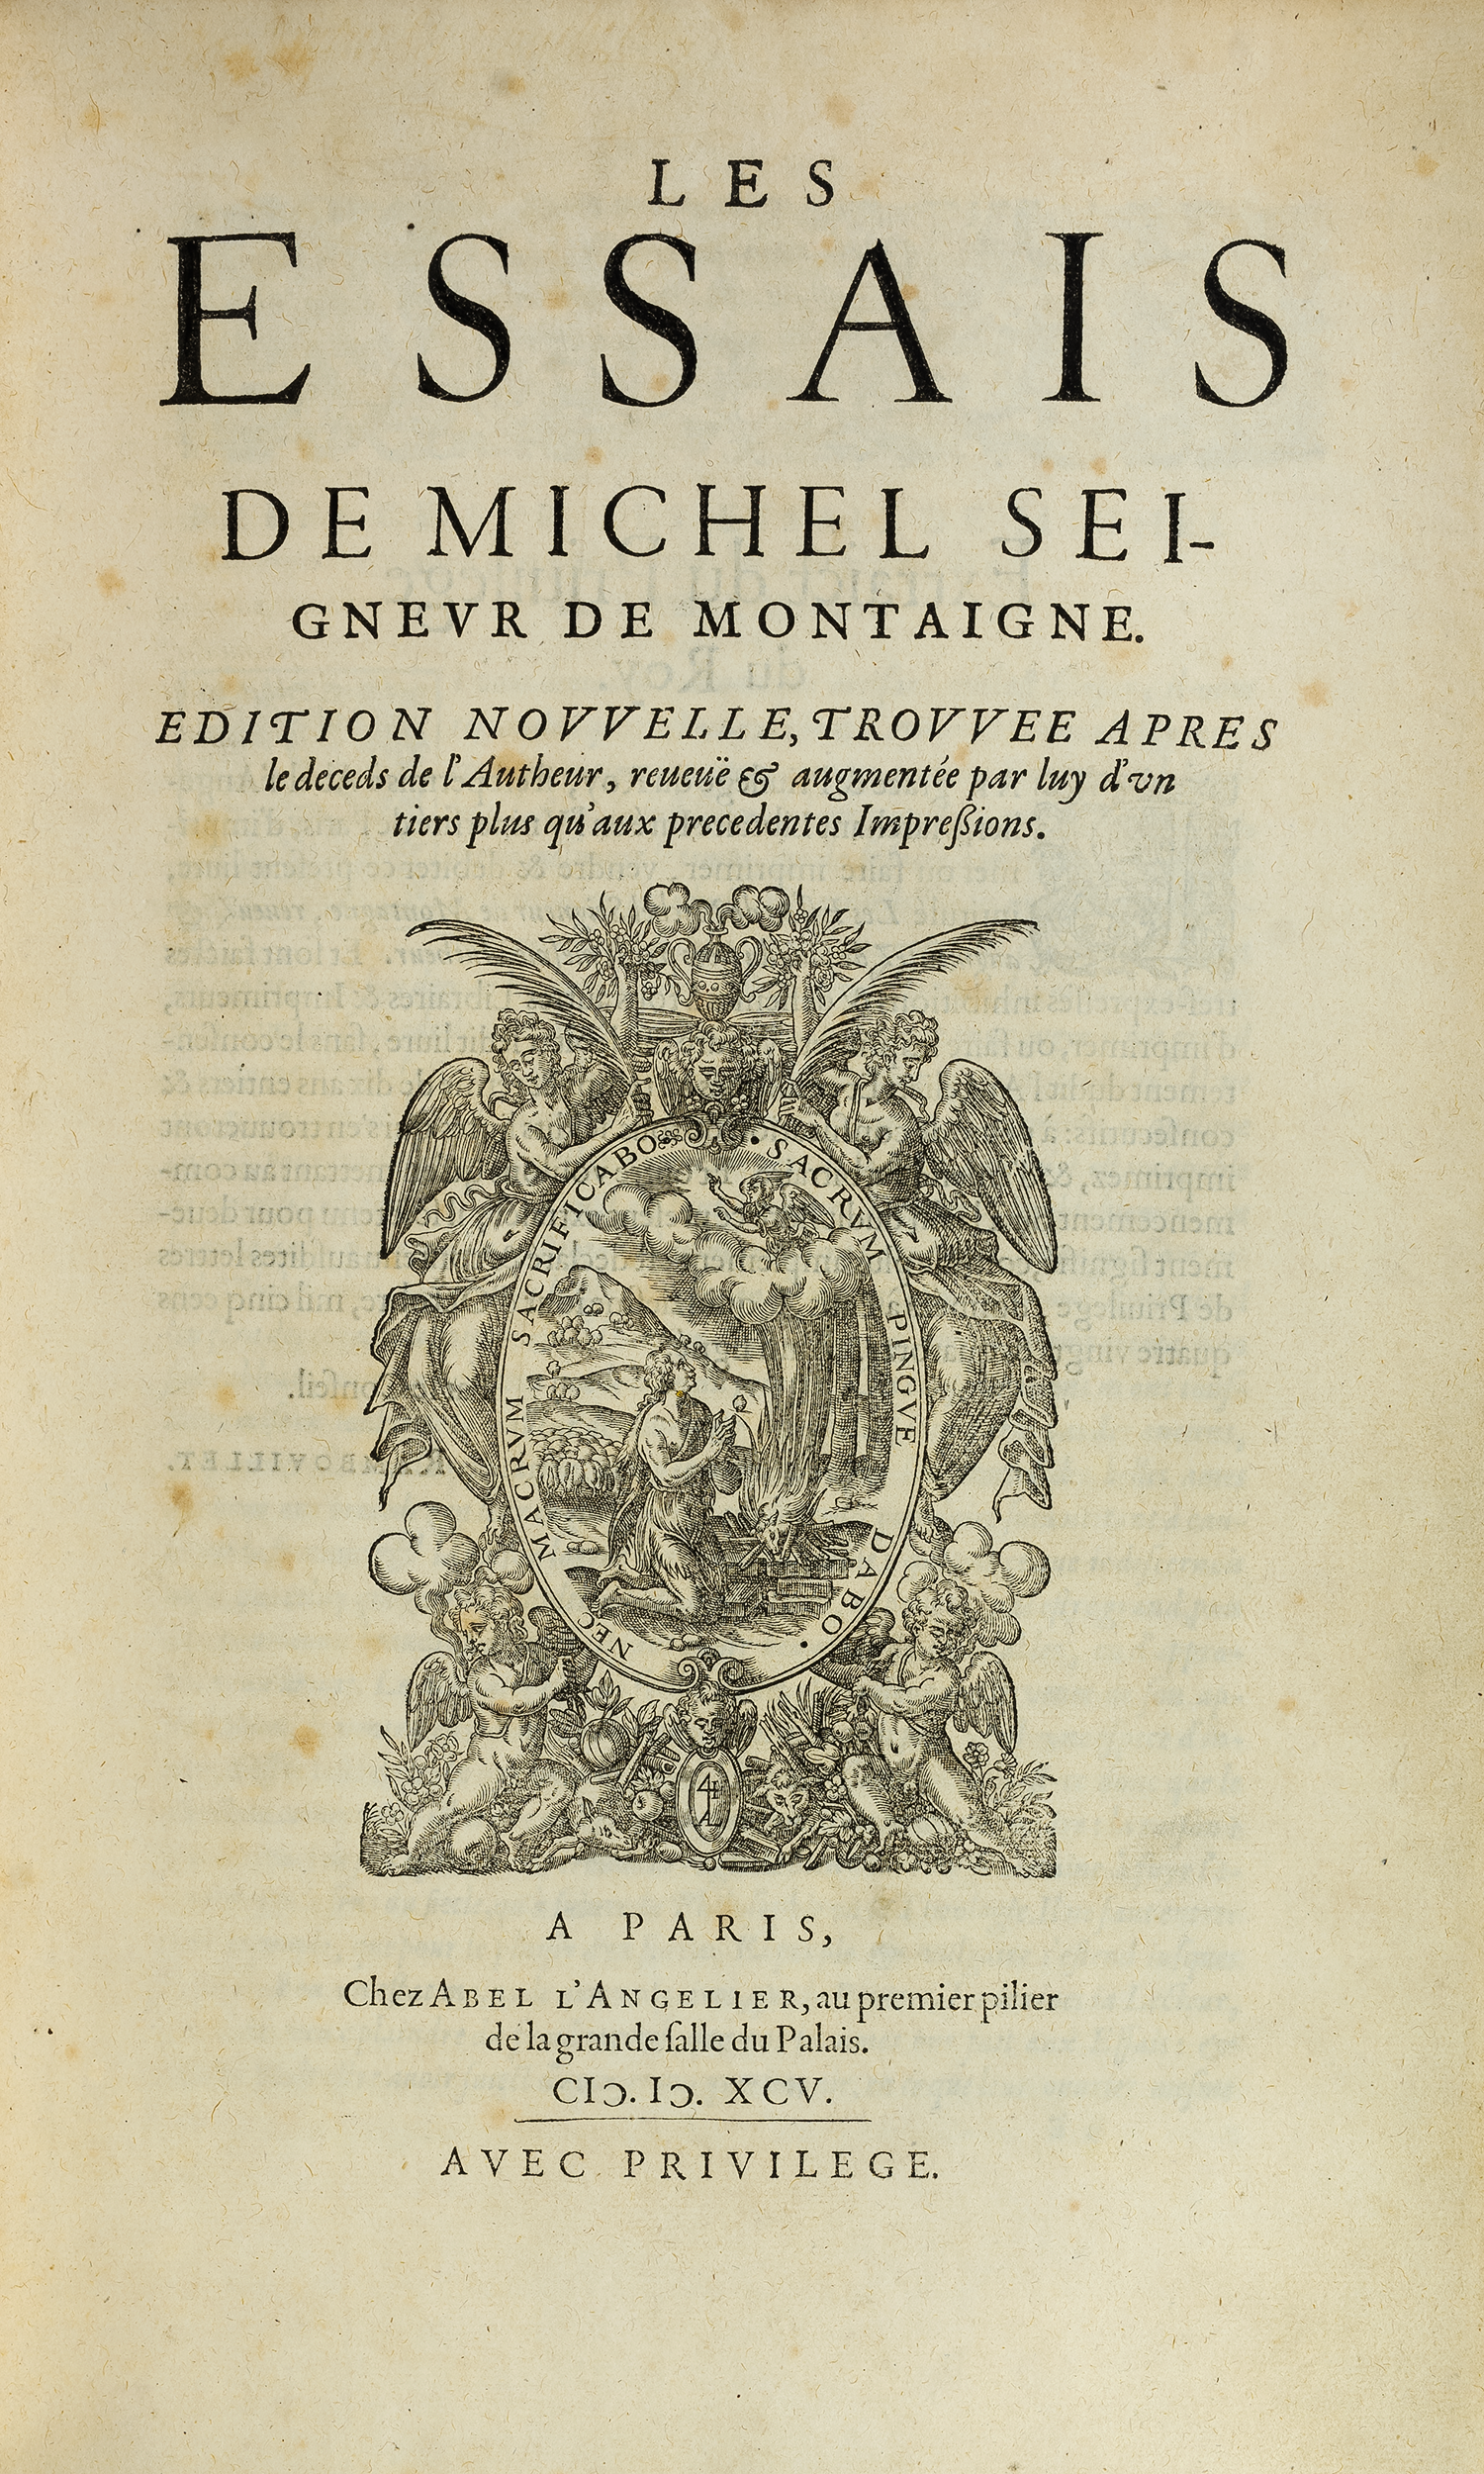 Montaigne-essais-1595-lortic-binding-title-page.png